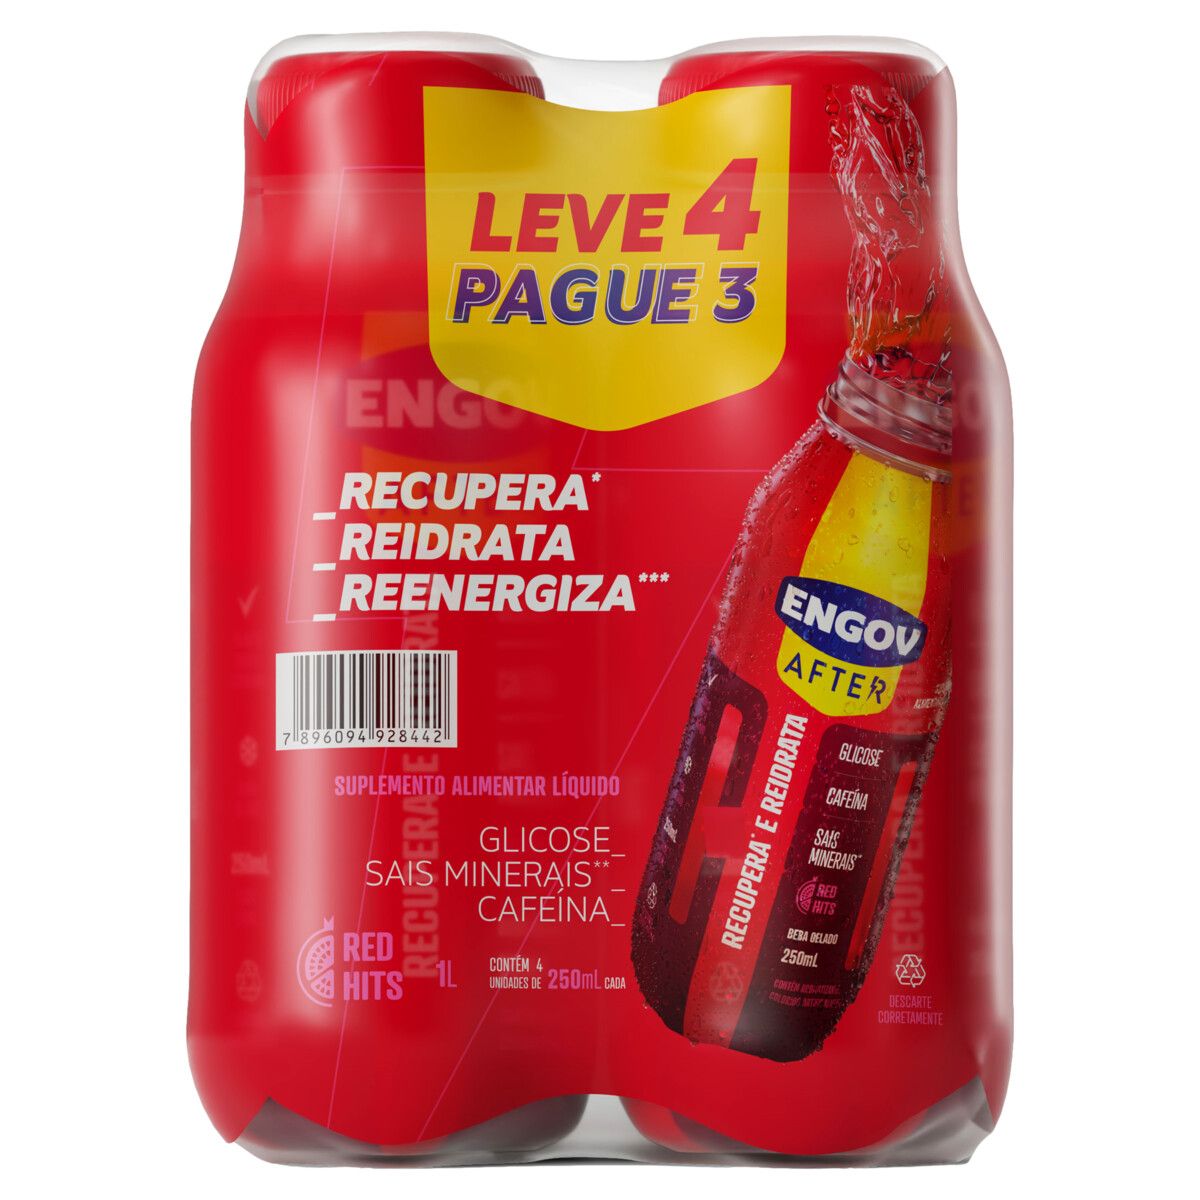 Engov After Red Hits 250ml Cada Leve 4 Pague 3 Unidades